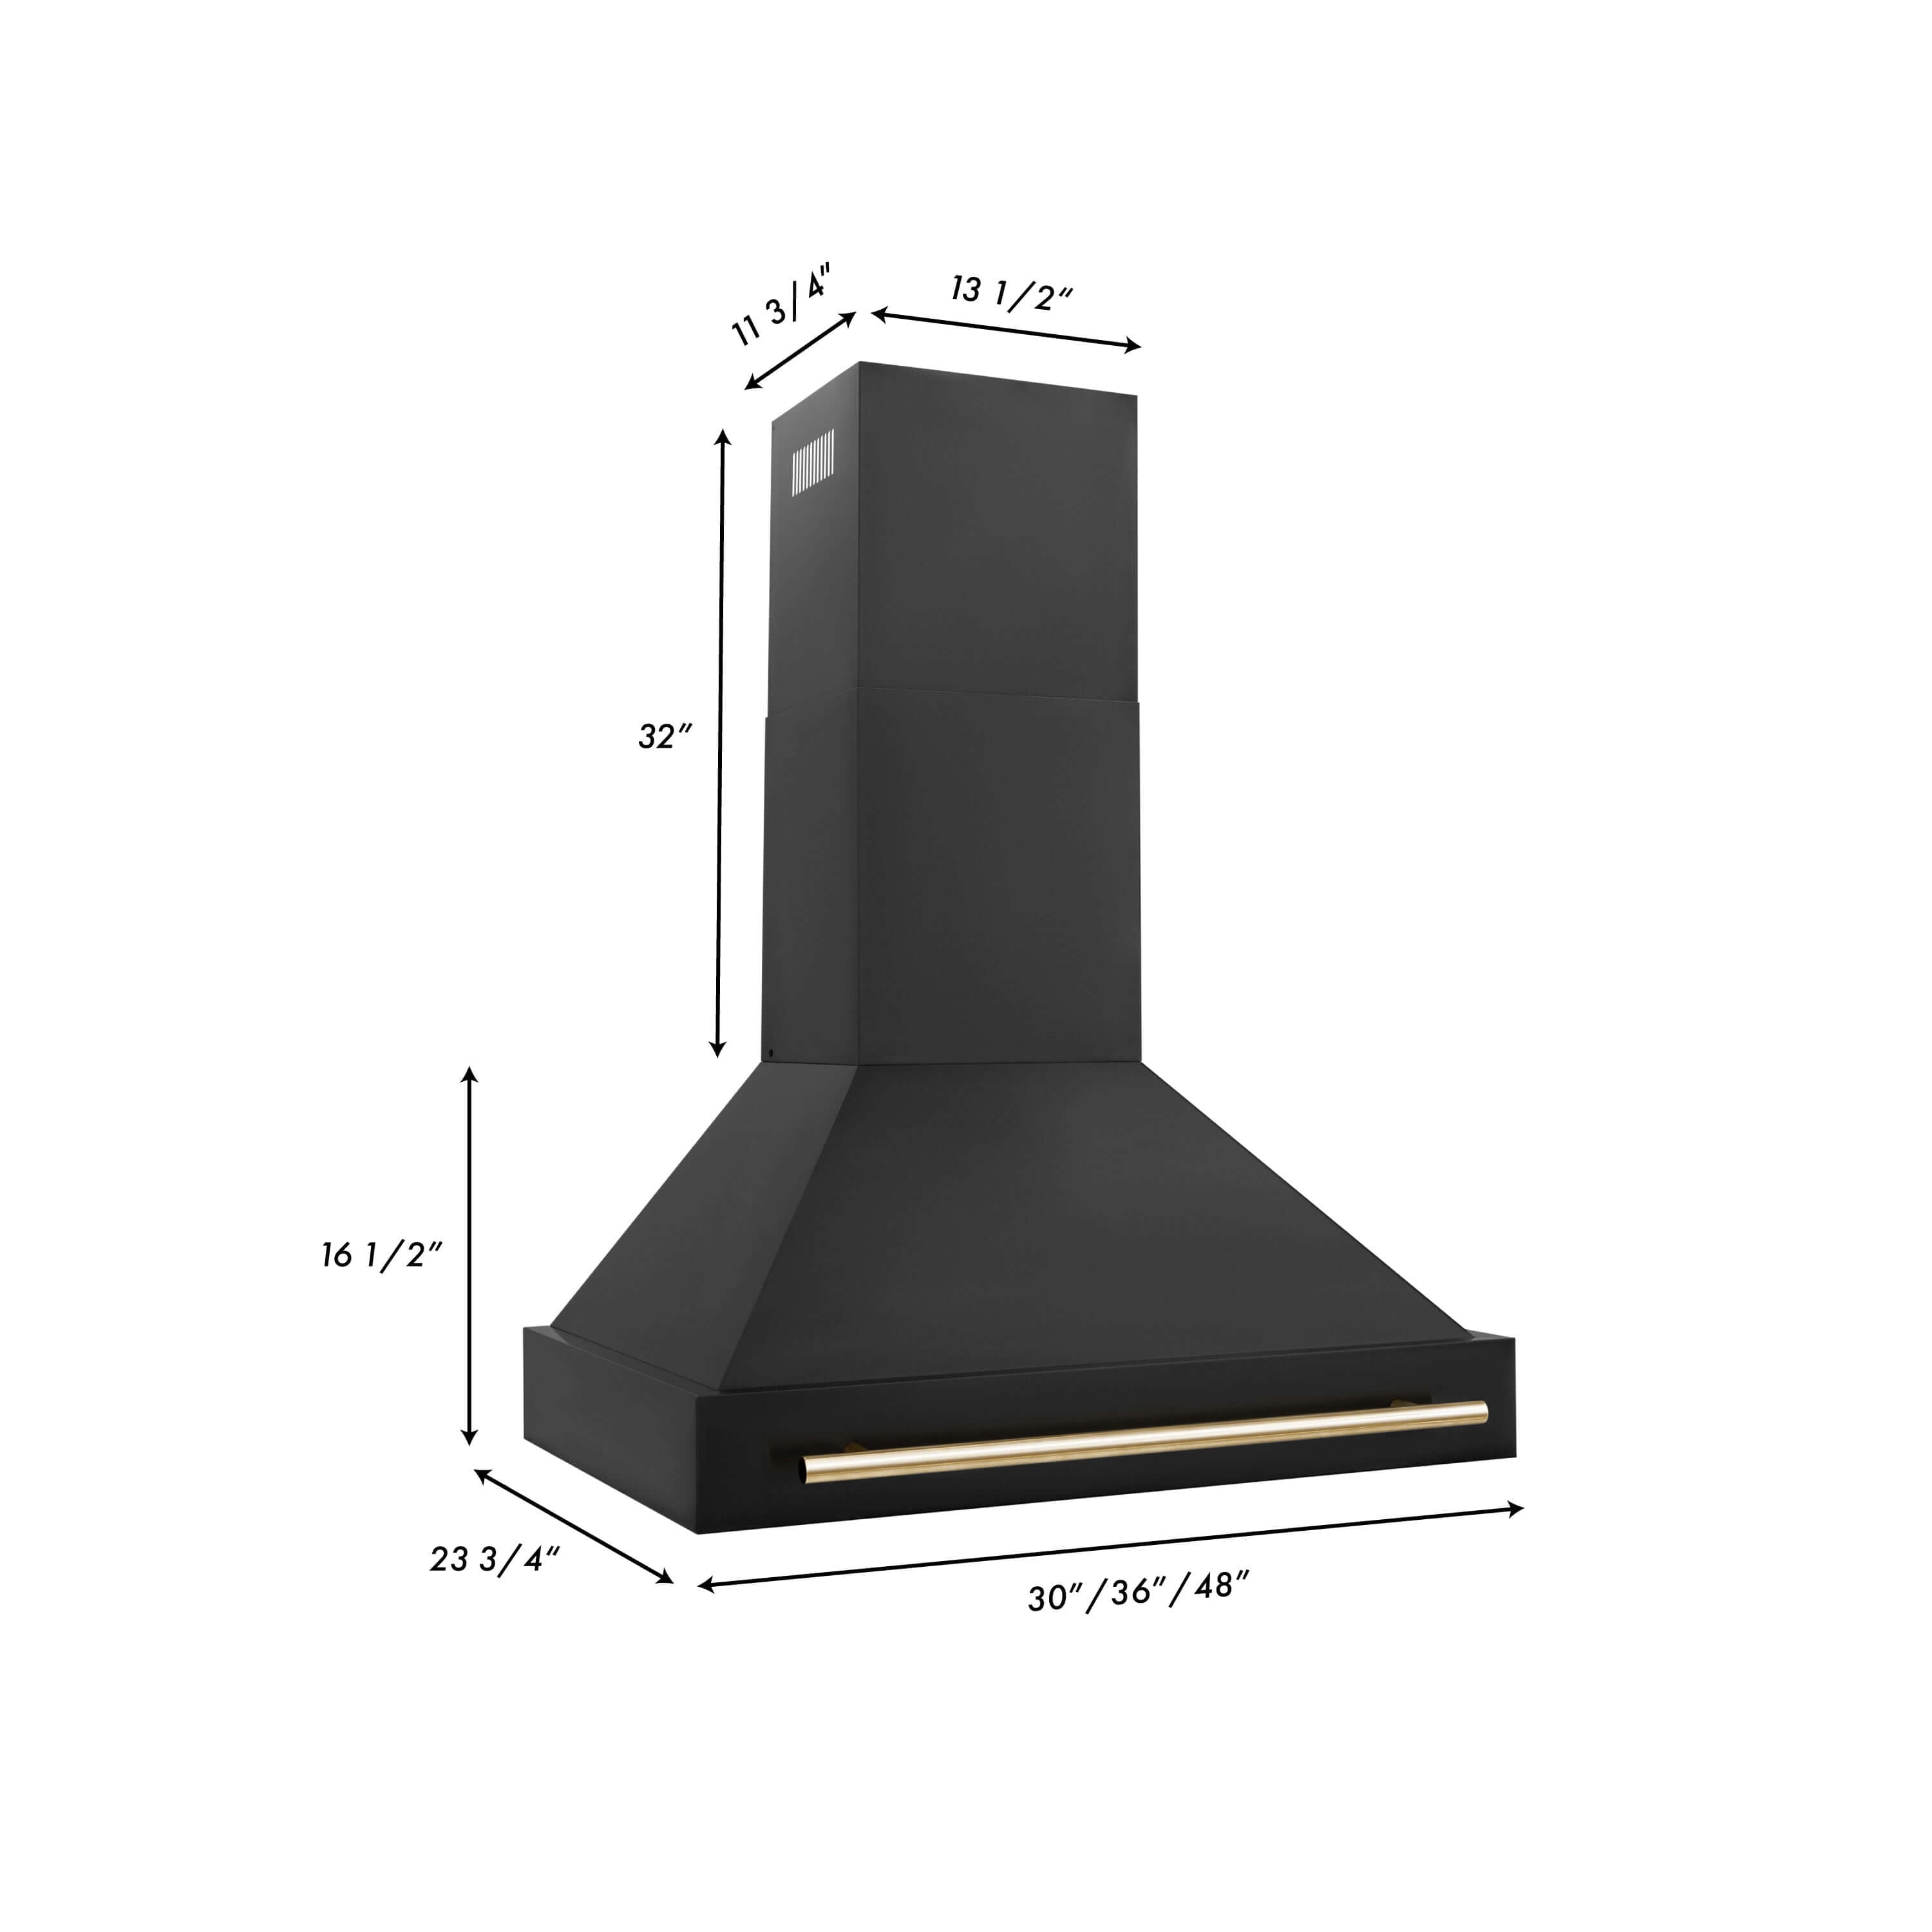 ZLINE Autograph Edition 36 in. Black Stainless Steel Range Hood with Handle (BS655Z-36) dimensional diagram with measurements.